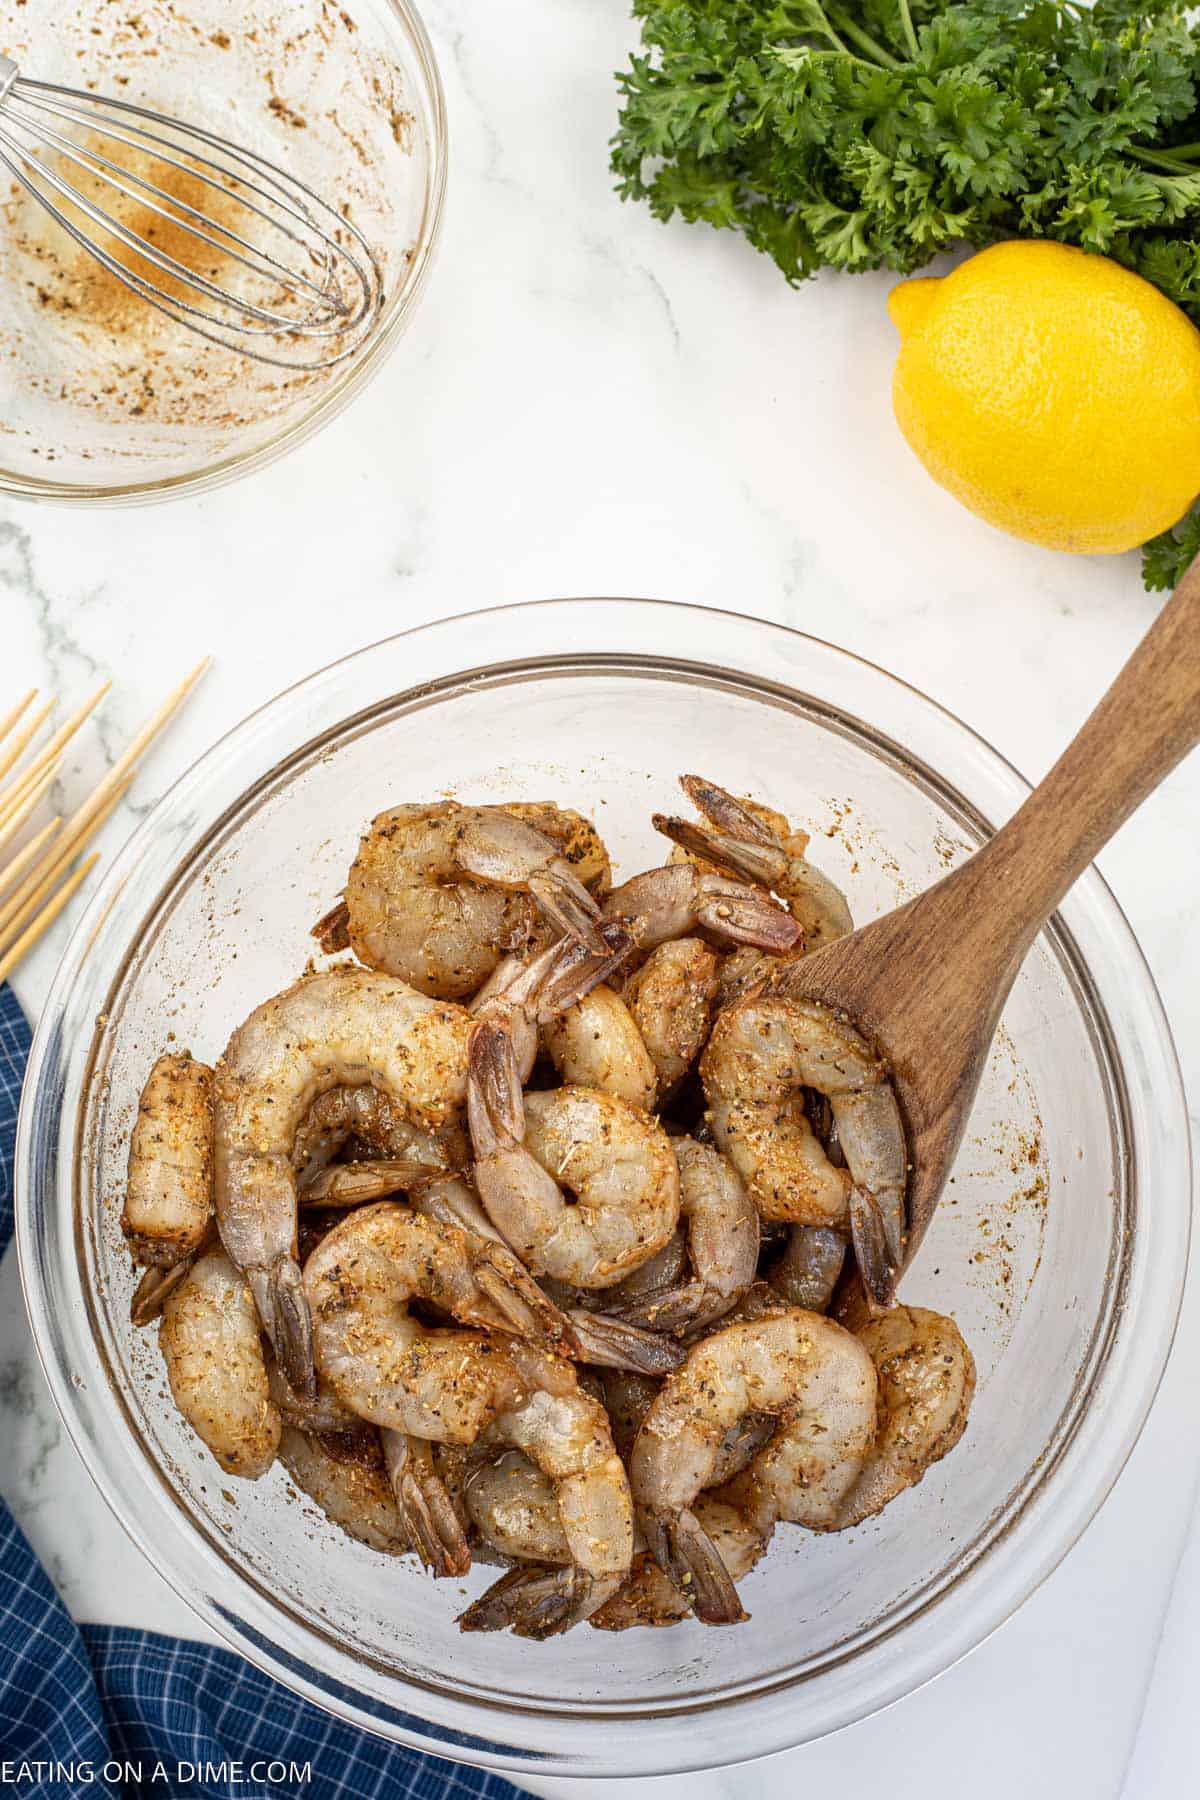 Combine the ingredients with the shrimp in a bowl with a wooden spoon